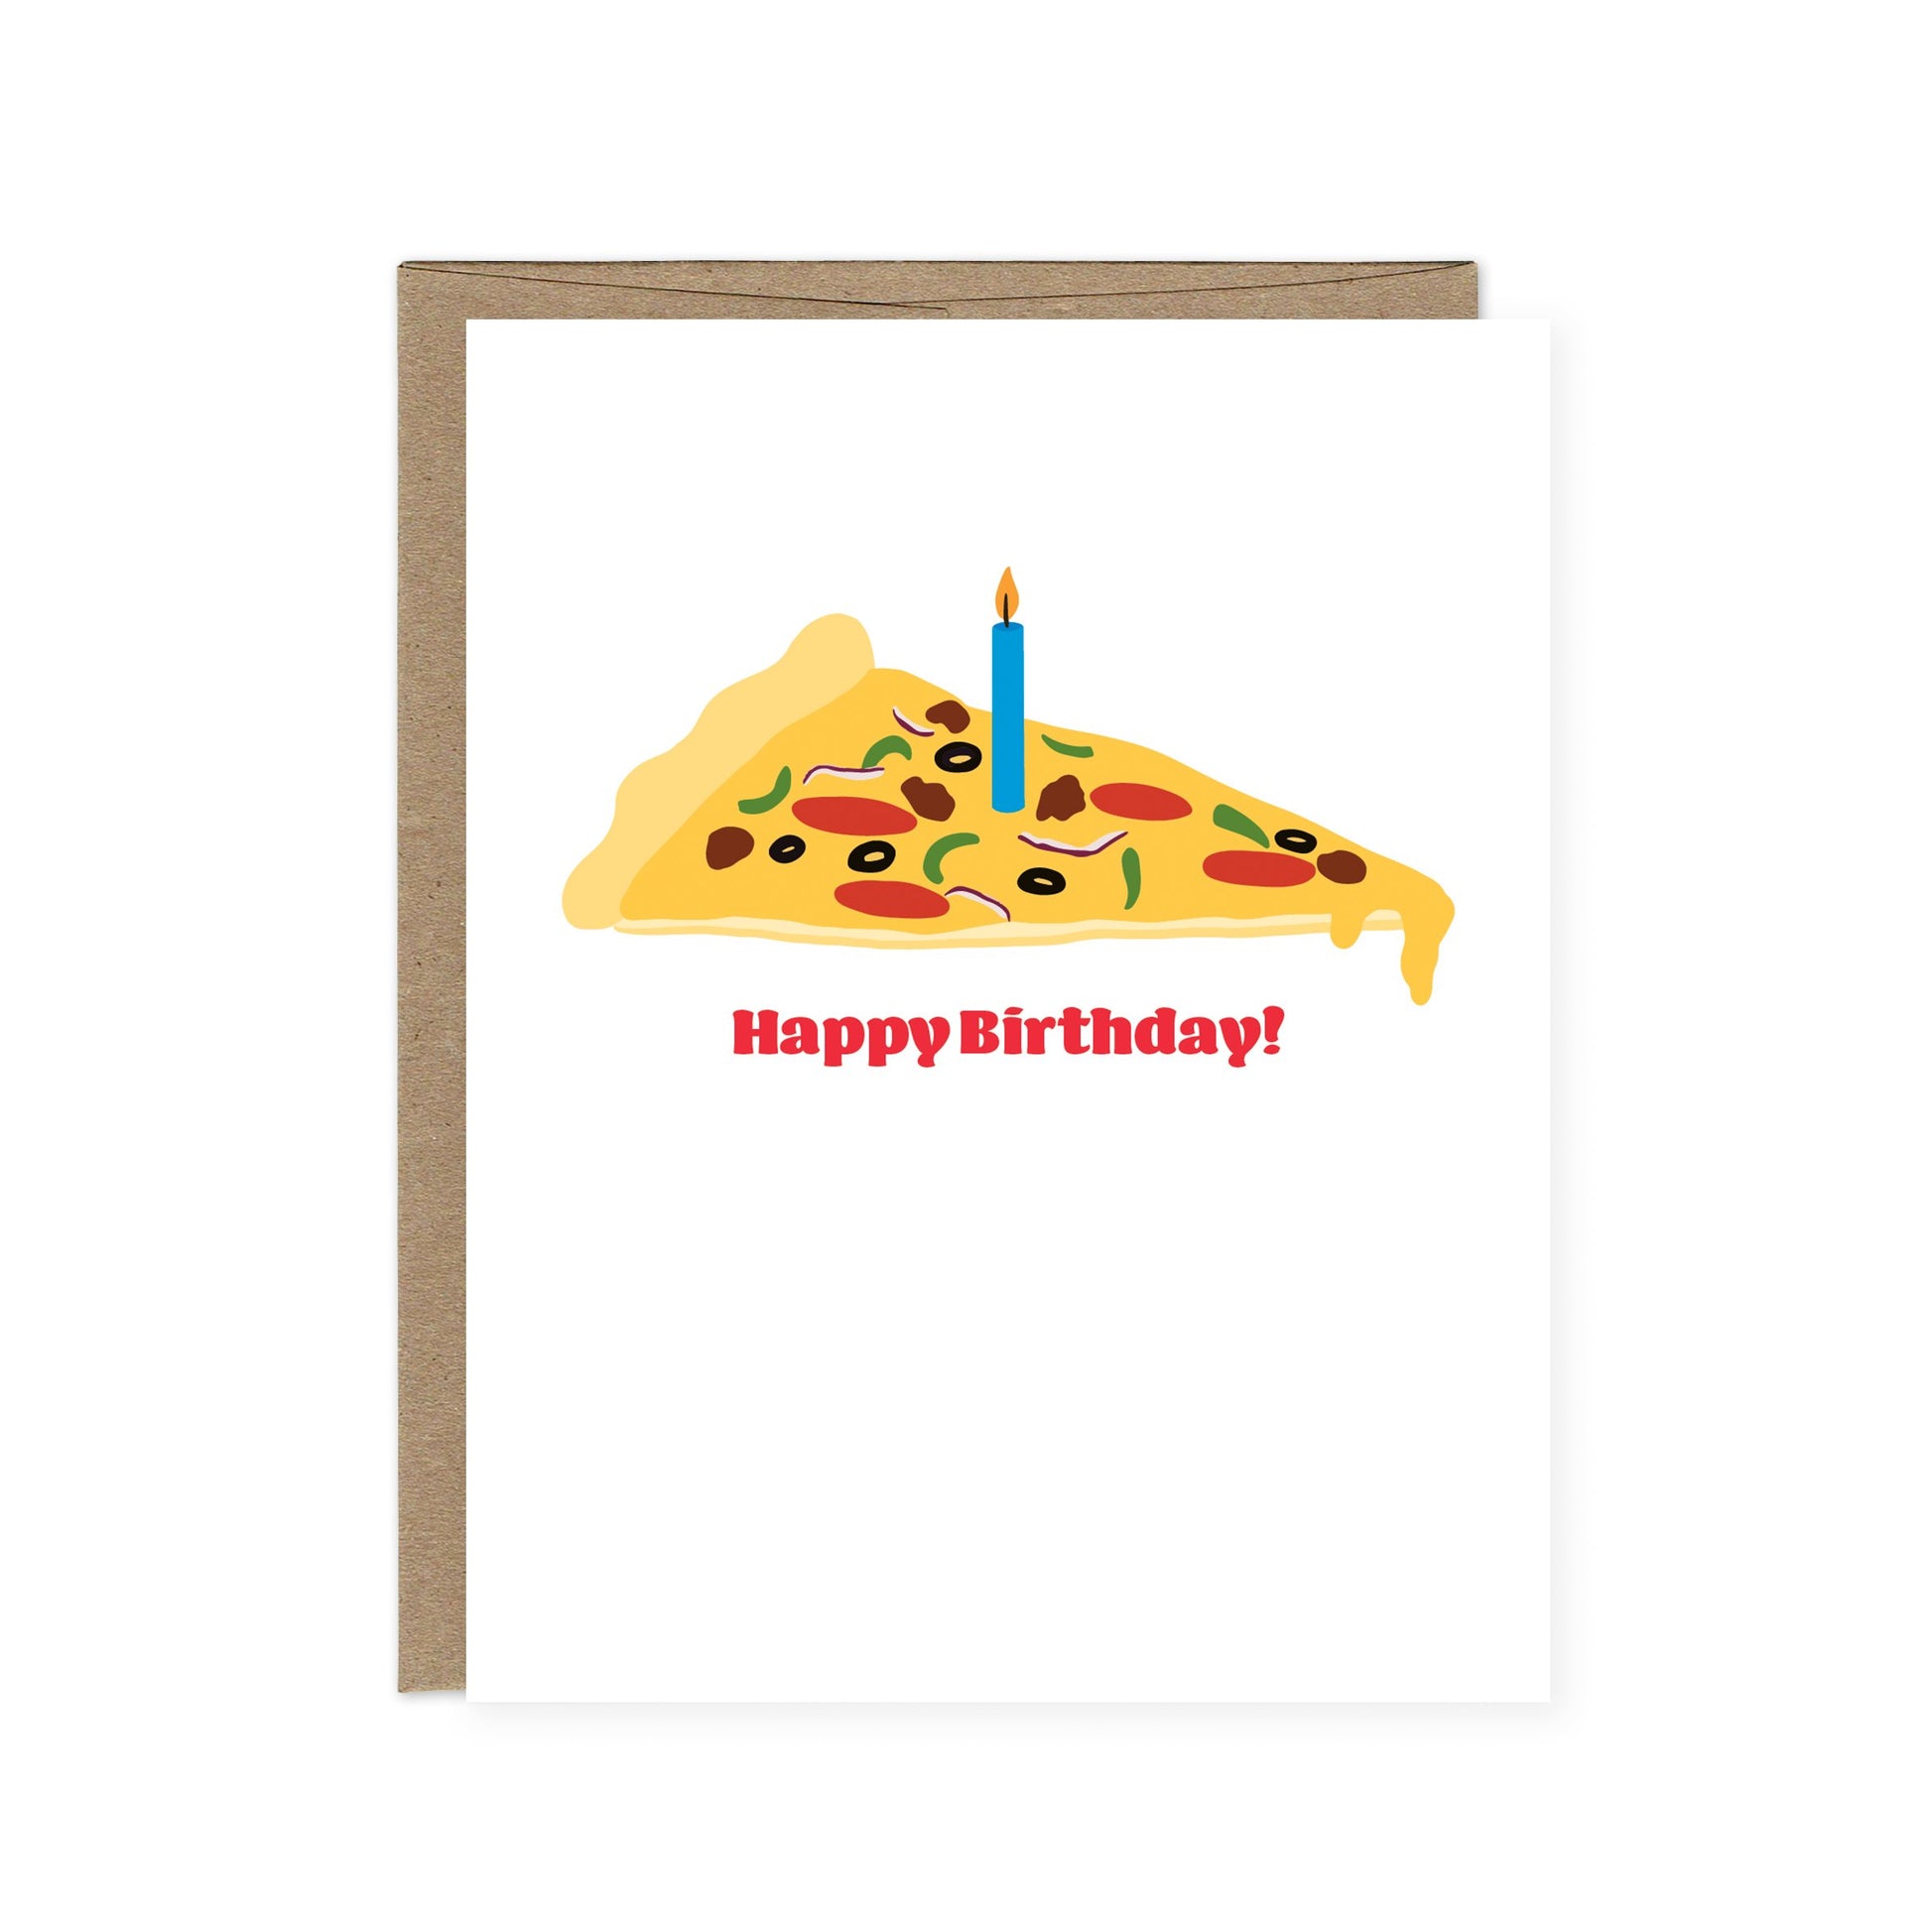 Illustrated supreme slice of pizza with a blue candle and "Happy Birthday!" in red text